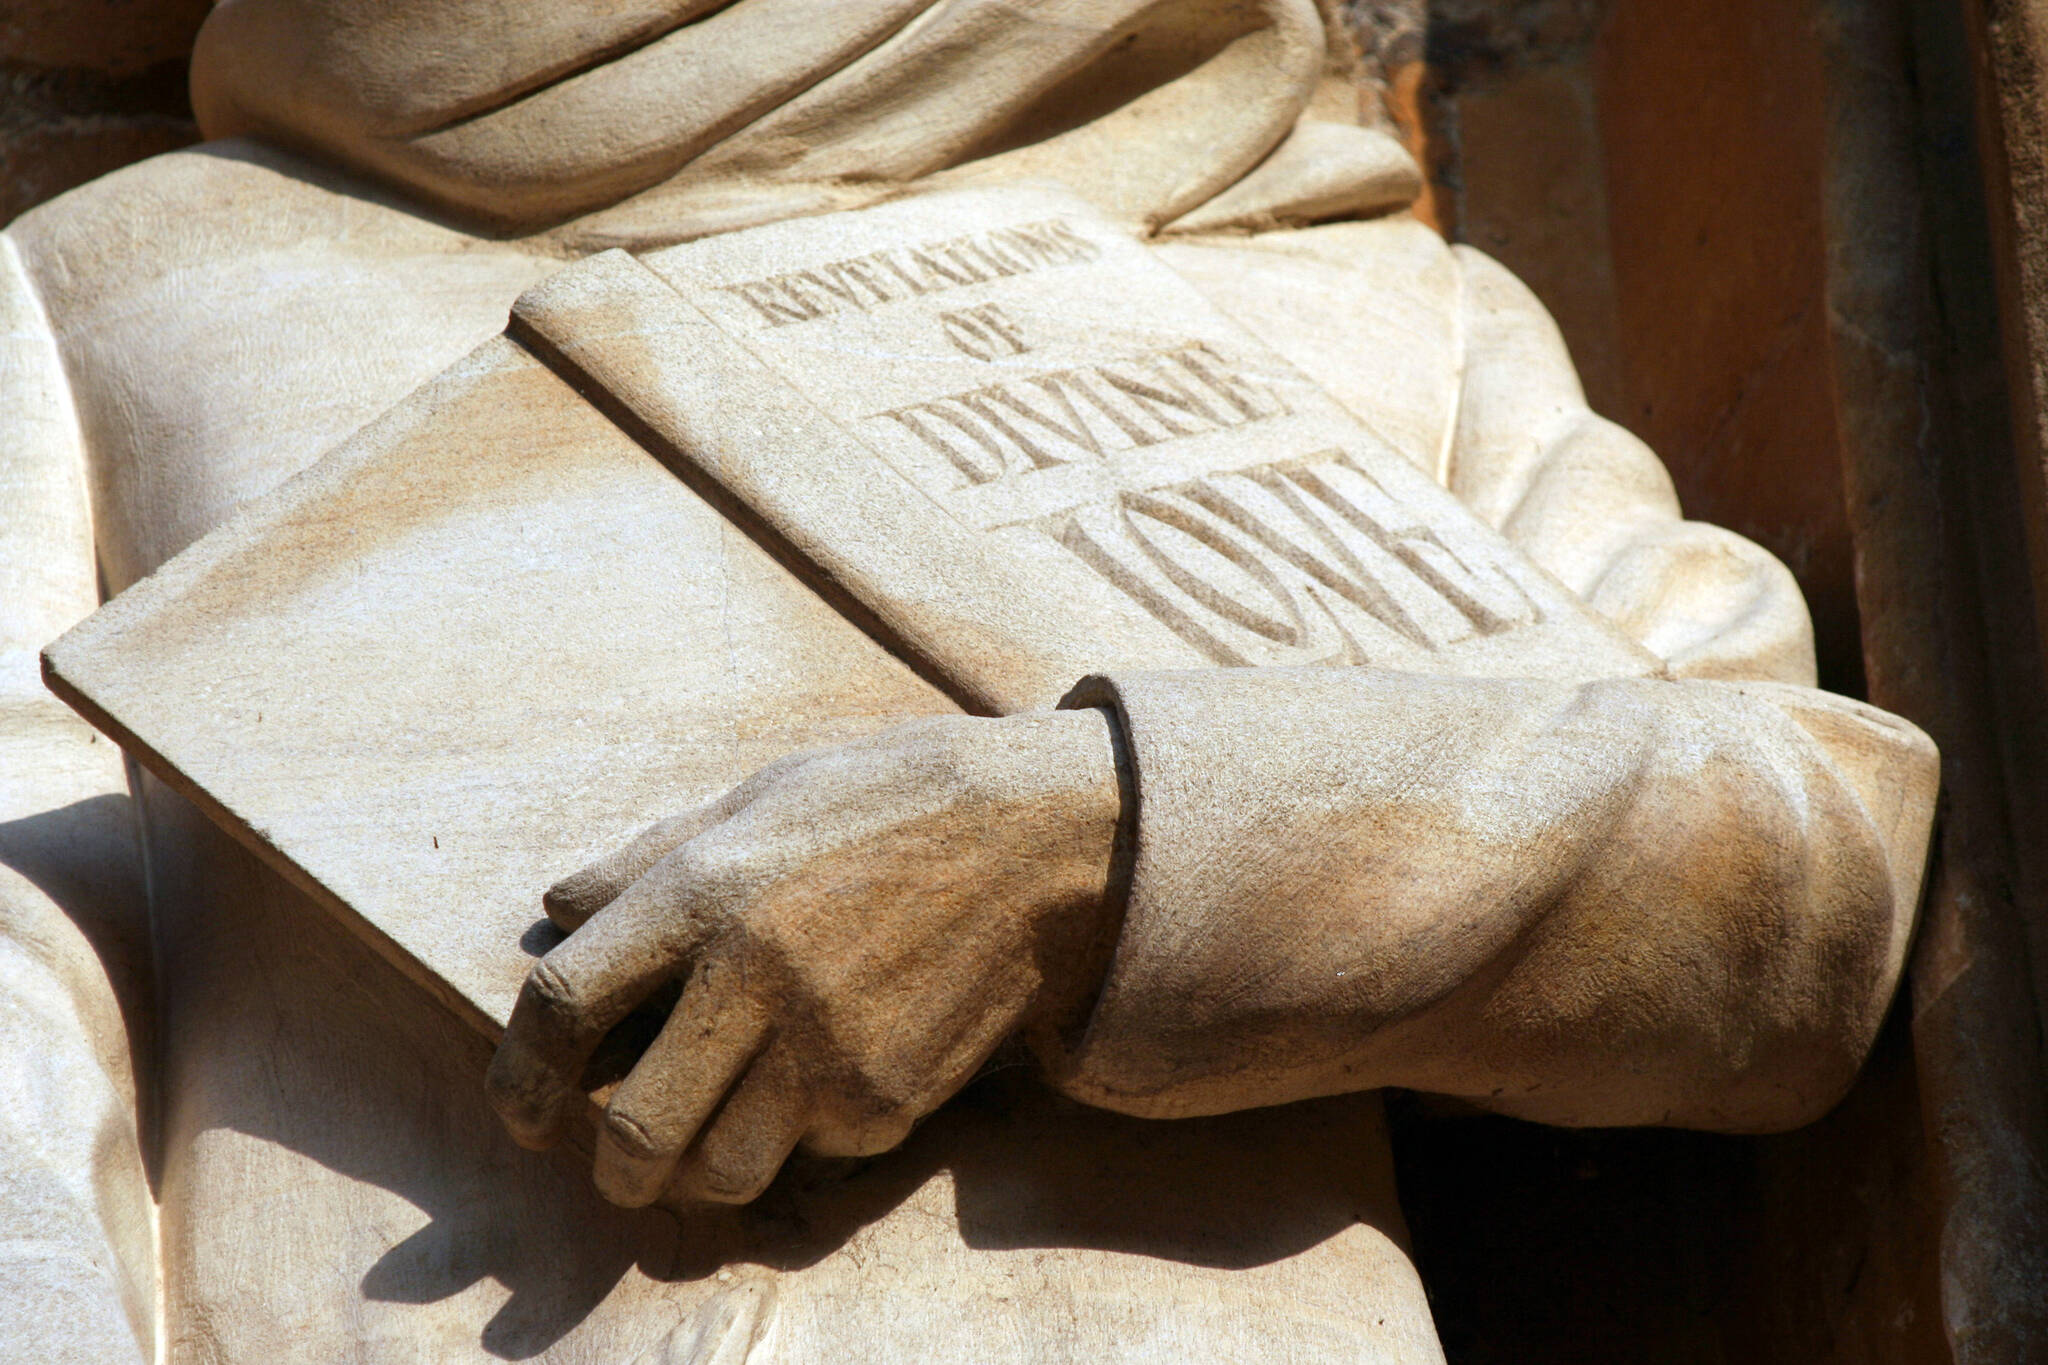 This photo available under a Creative Commons license shows a statue of Julian of Norwich holding her book "Revelations of Divine Love." Leo Reynolds / Flickr)